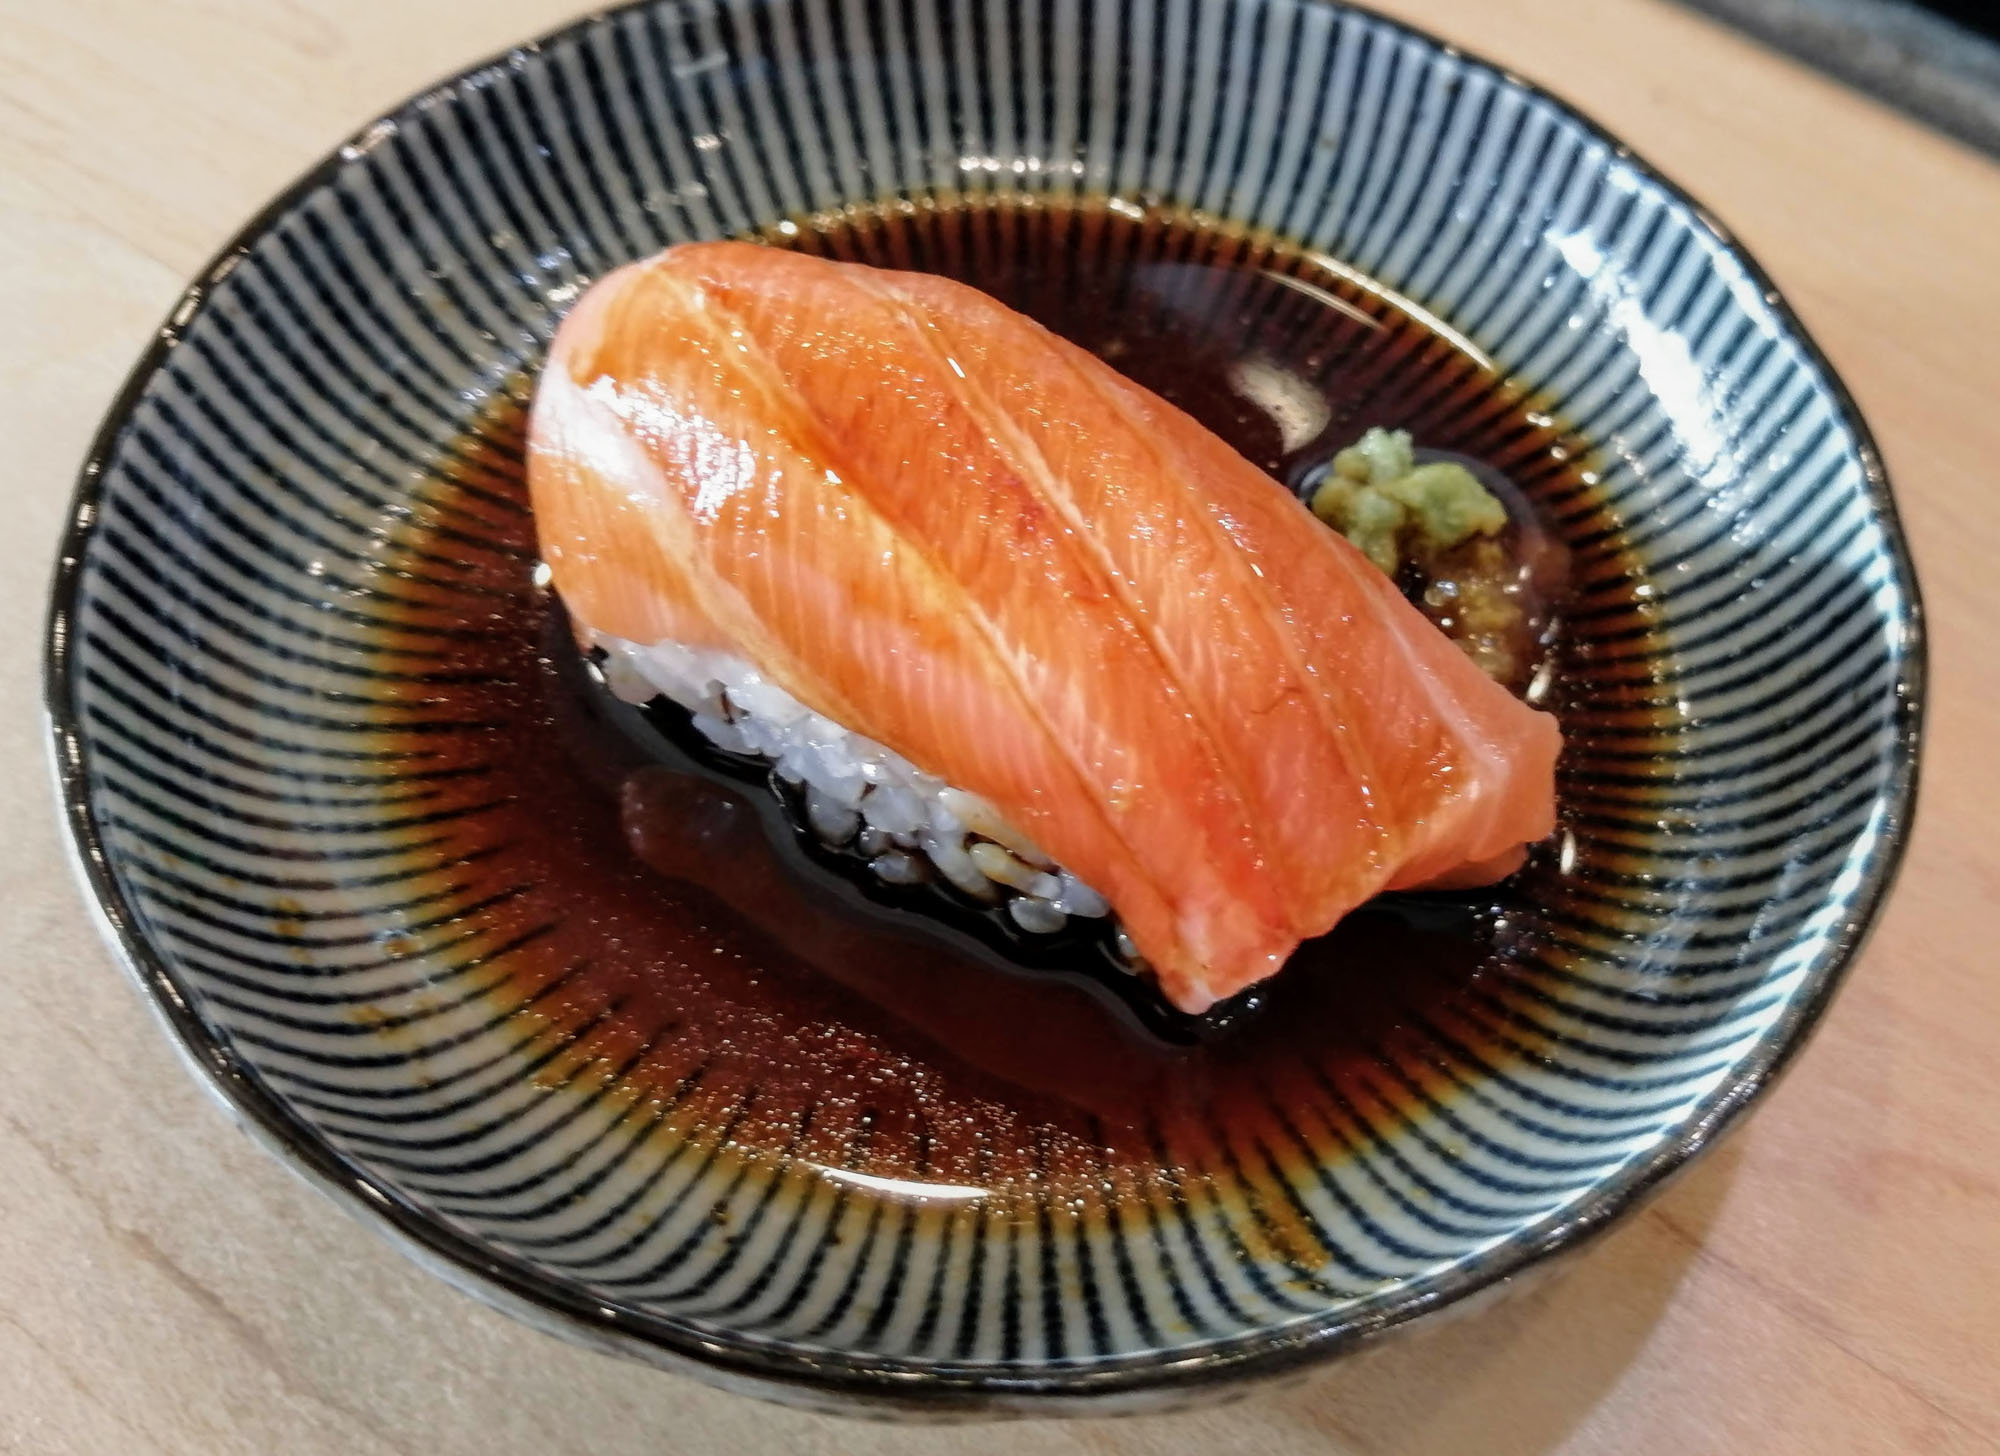 A close-up of a piece of nigiri sushi made with a slice of raw salmon sitting on a serving plate with soy sauce and wasabi. Photo by Paul Young.